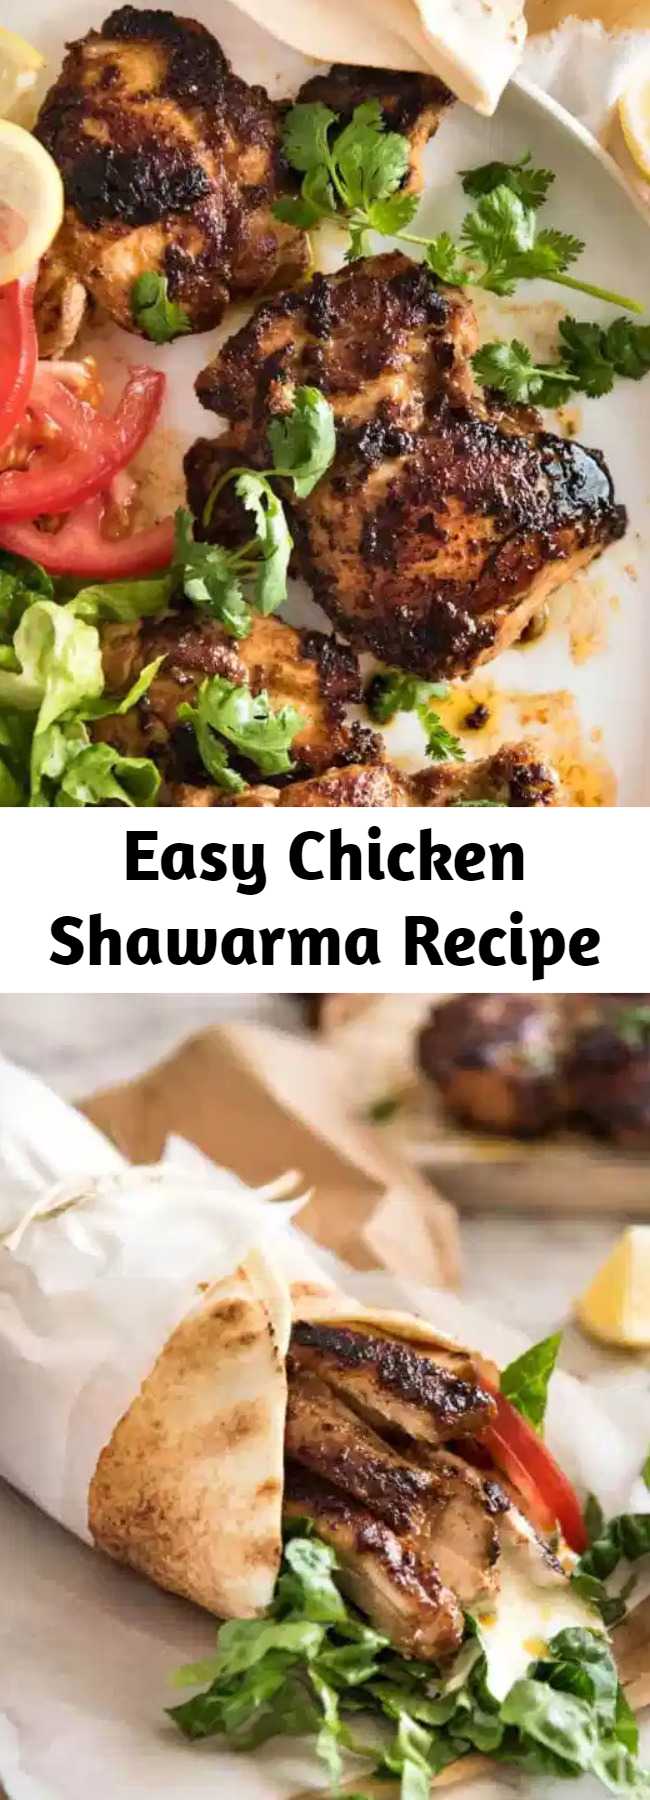 Easy Chicken Shawarma Recipe - This Middle Eastern chicken is incredibly aromatic. The marinade is very quick to prepare and the chicken can be frozen in the marinade, then defrosted prior to cooking. It is best cooked on the outdoor grill / BBQ, but I usually make it on the stove. Serve with a simple salad and flatbread laid out on a large platter and let your guests make their own wraps.